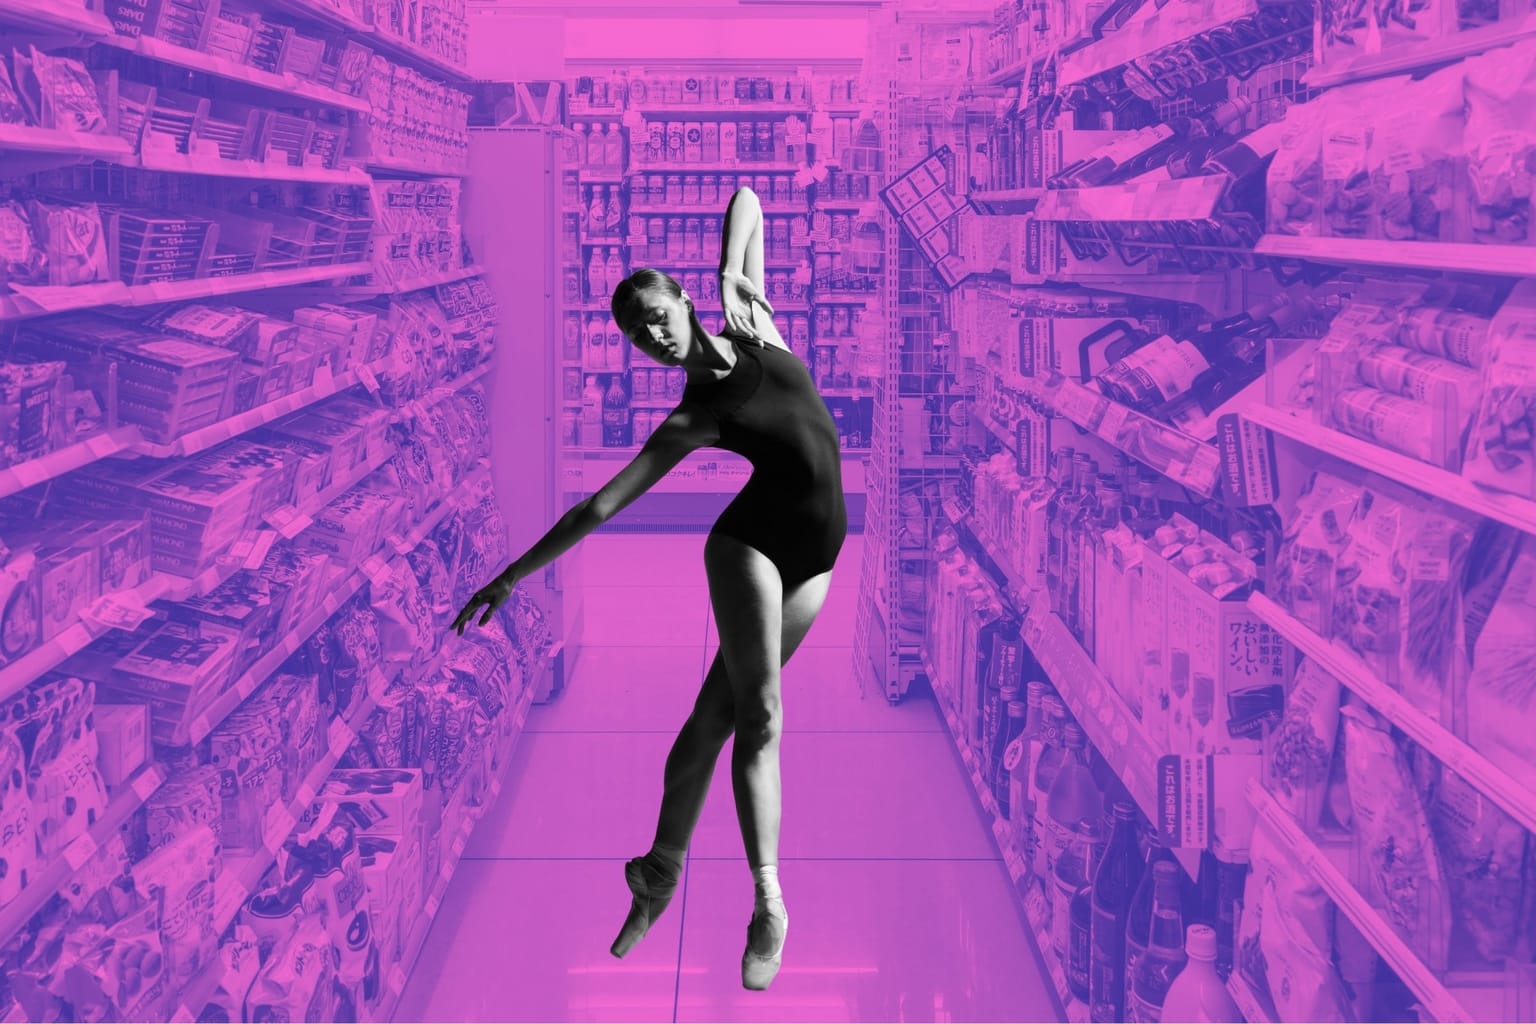 TW Creatives: “The Convenience Store Ballerina” — A Short Fiction Story by Simon Rowe